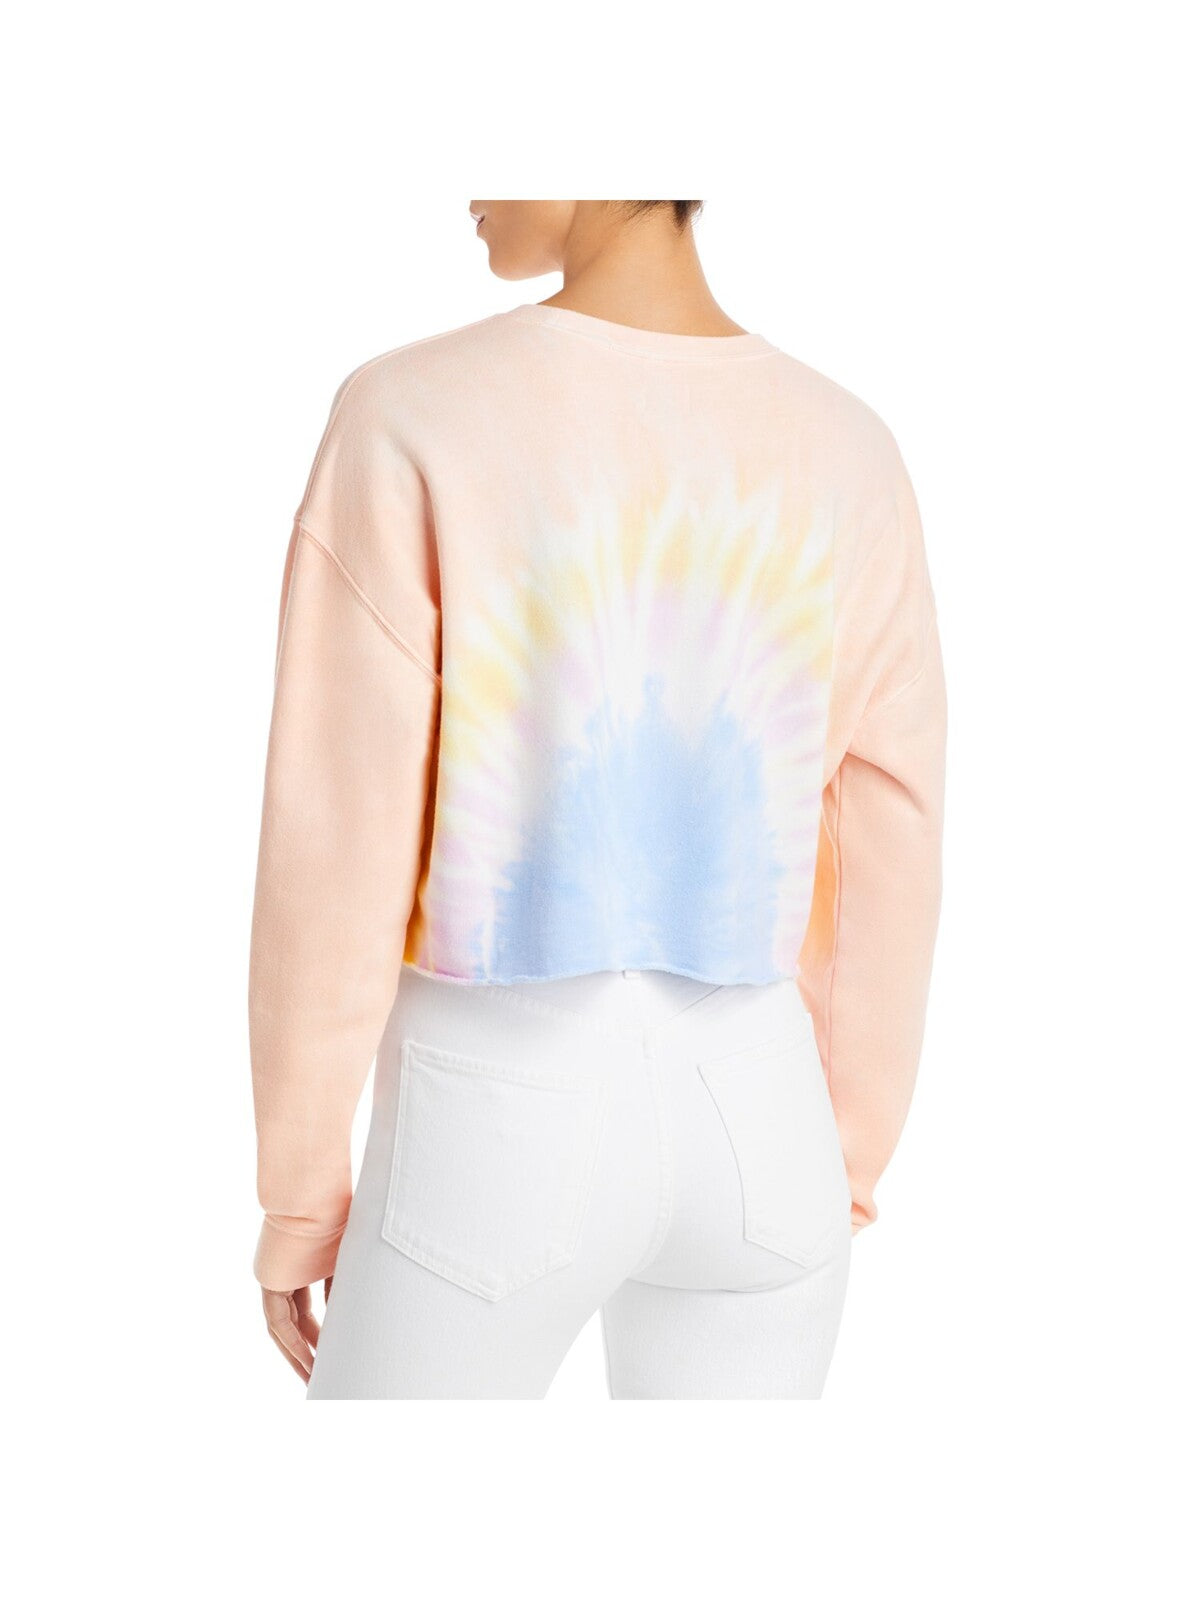 WSLY Womens Coral Ribbed Cropped Tie Dye Long Sleeve Sweatshirt S